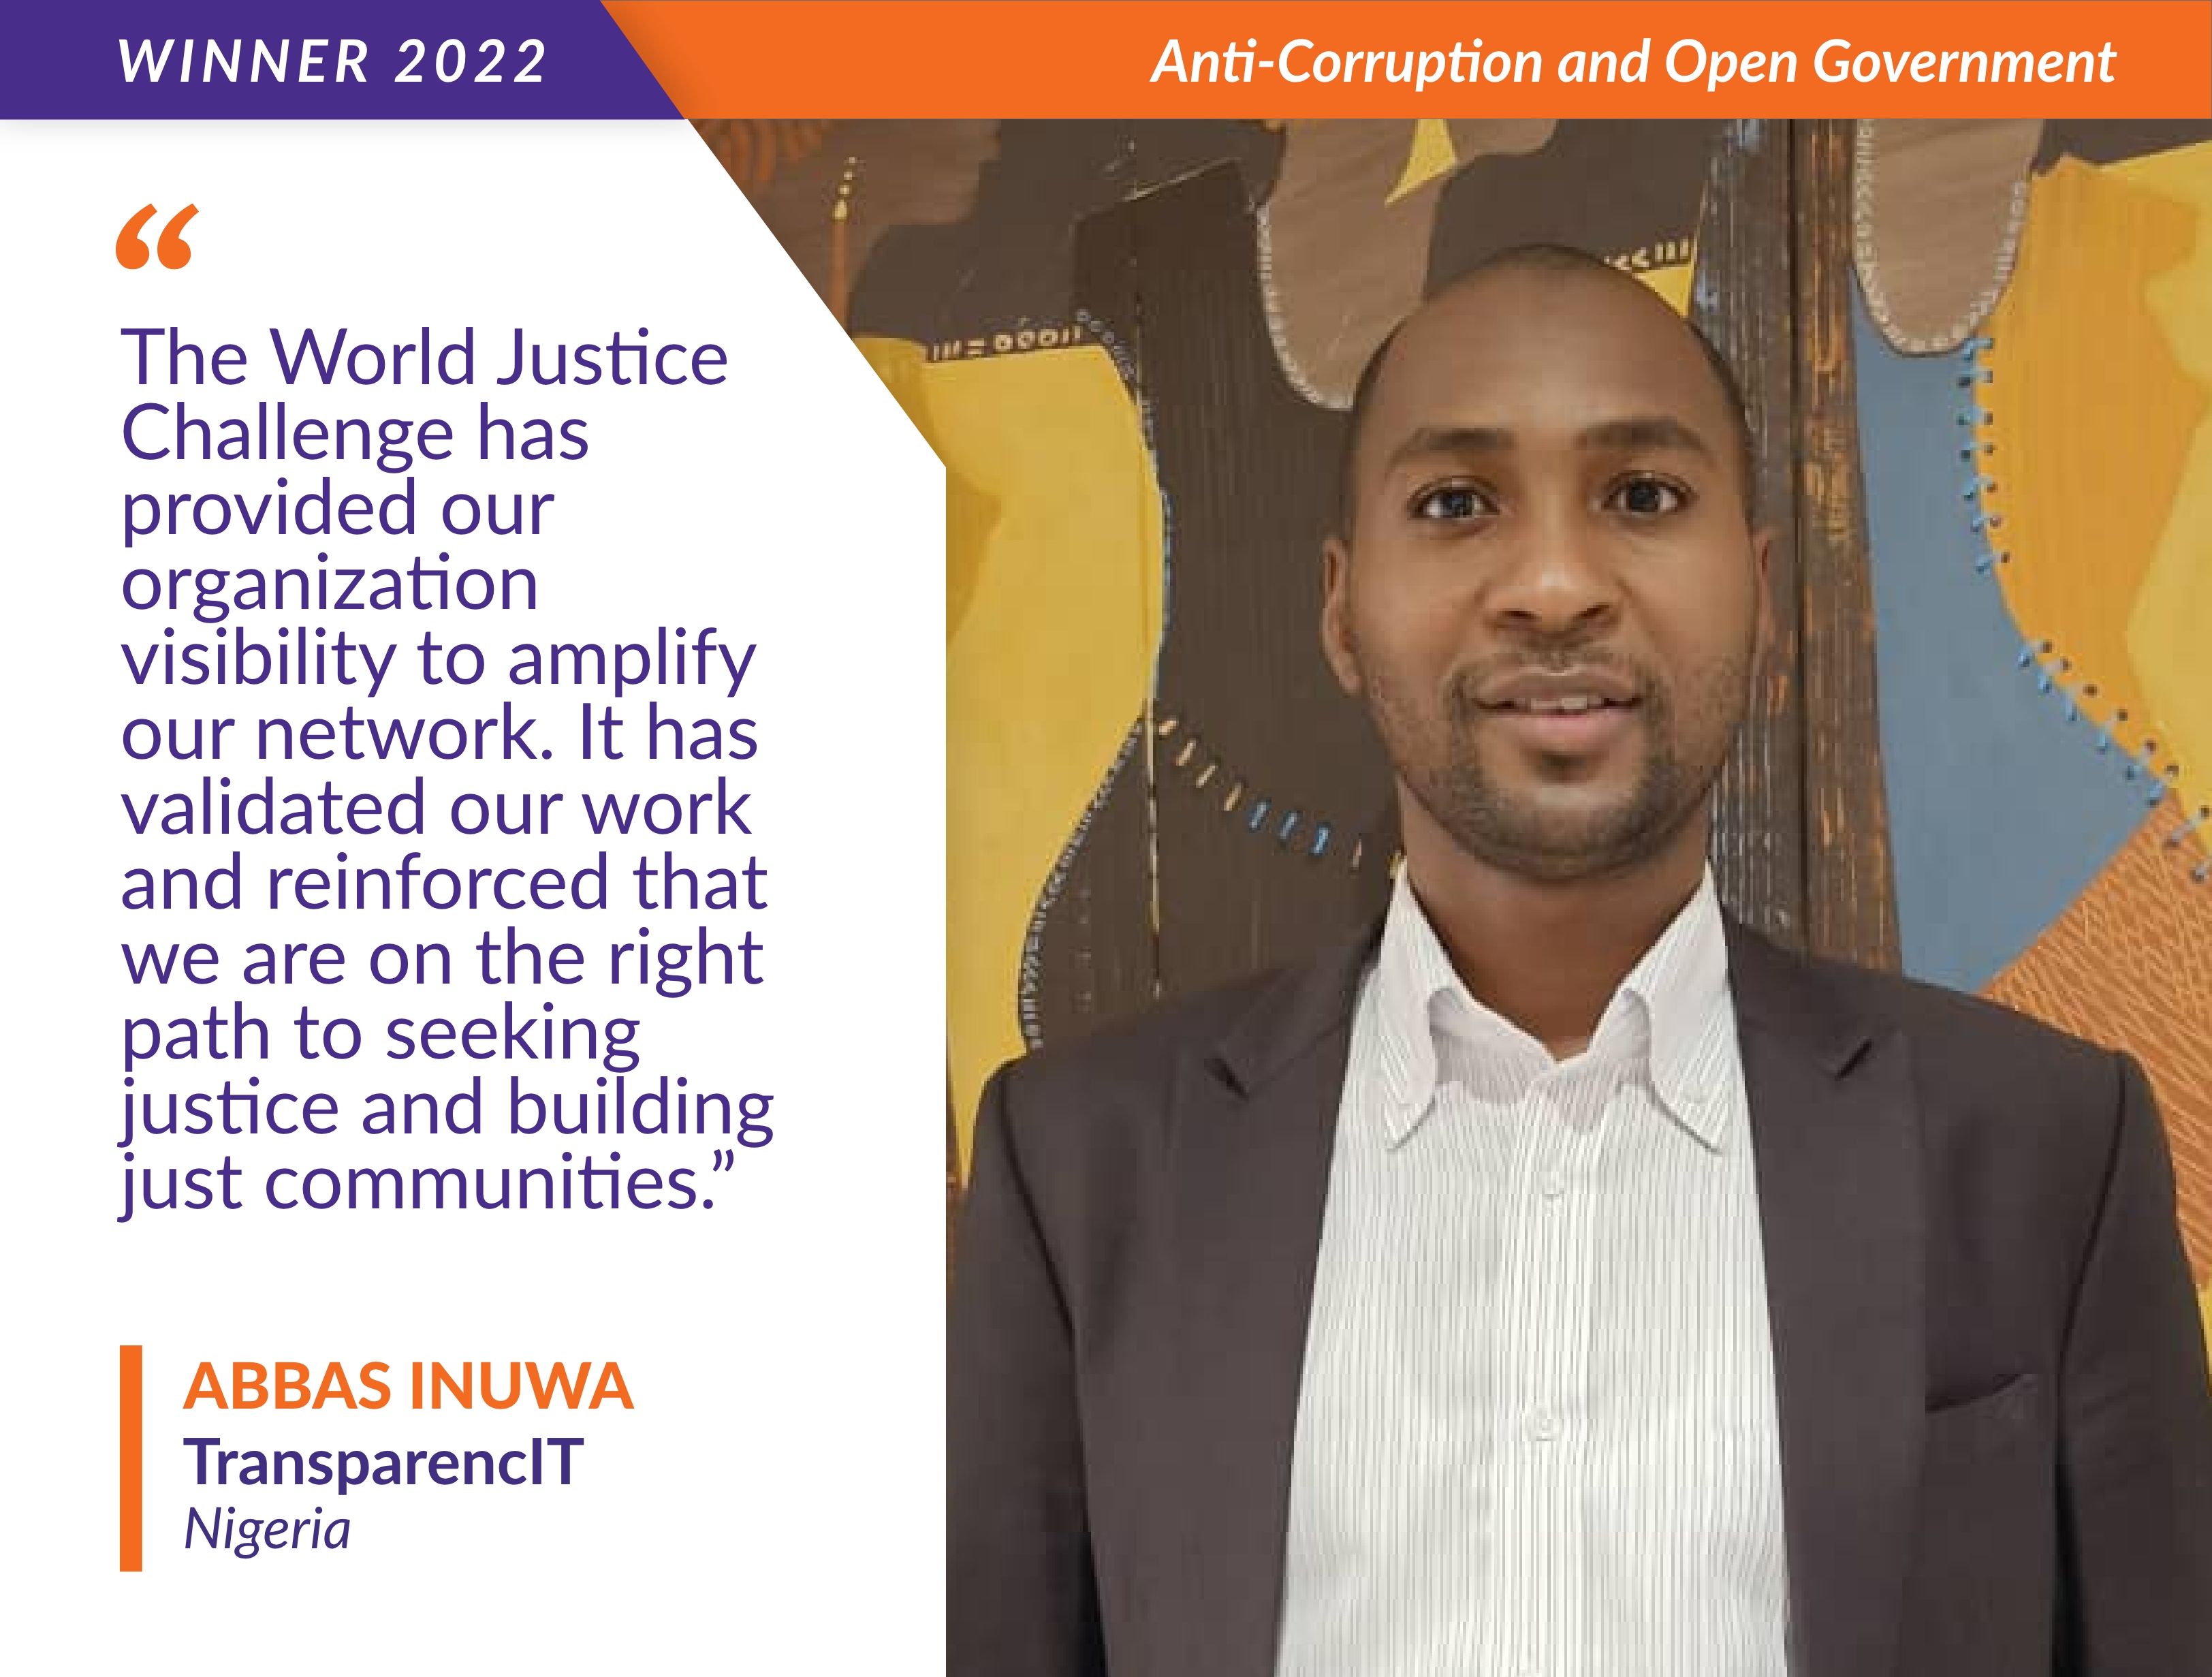 Abbas Inure from TransparenceIT shares a testimonial about the World Justice Challenge